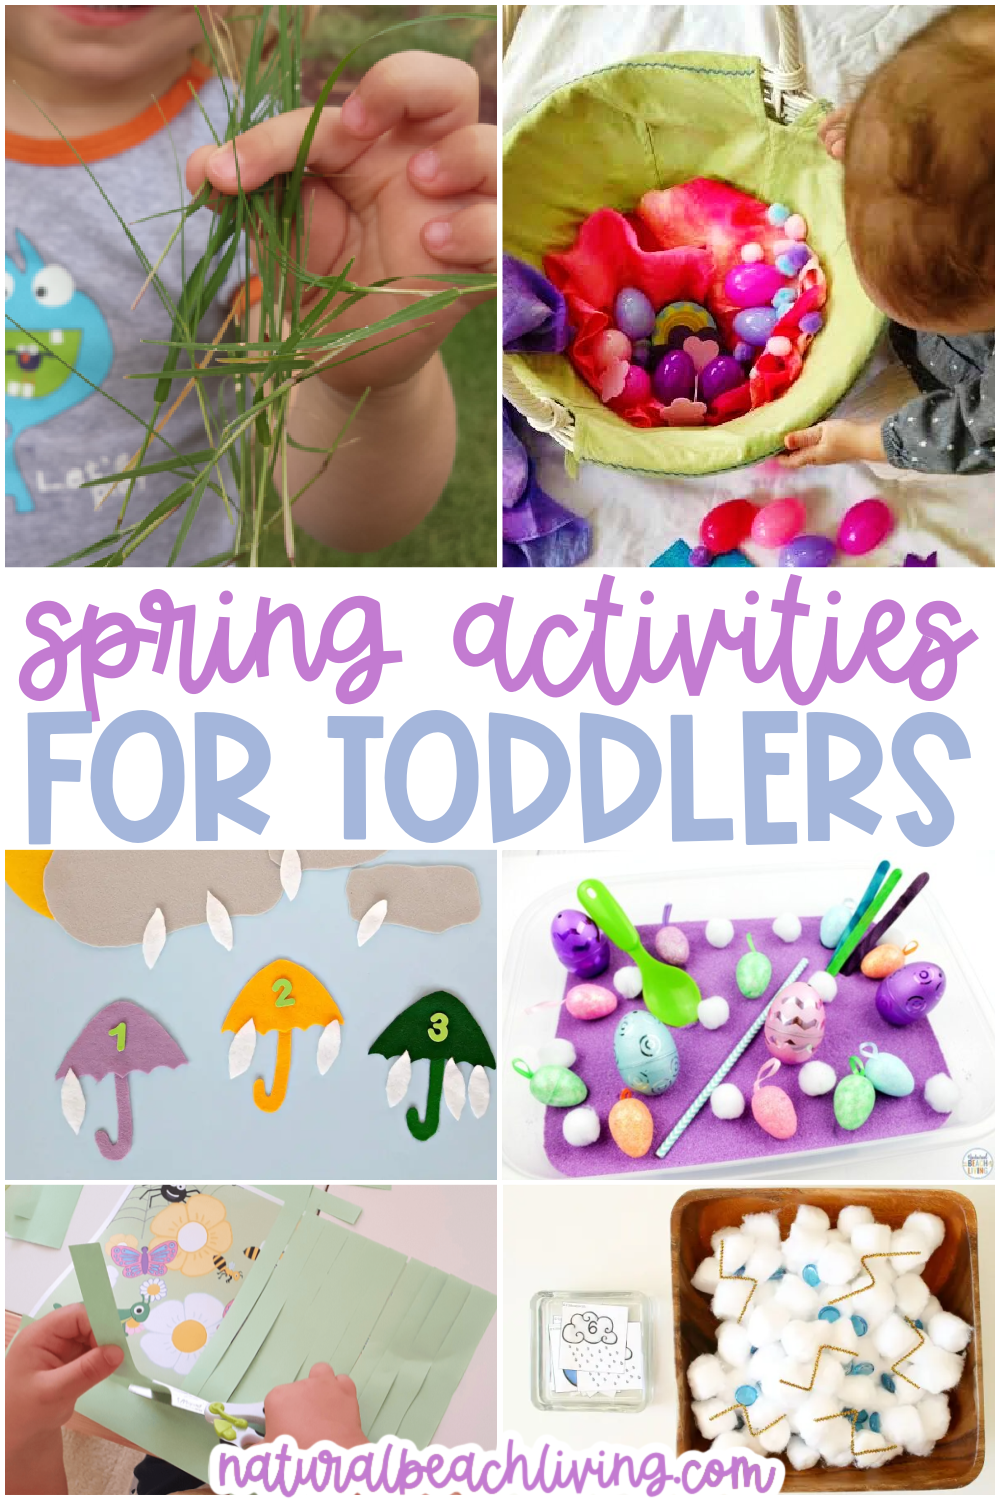 28 FUN Spring Activities for Toddlers, We’ve got plenty of ideas to keep your toddler entertained this spring season, from exploring nature to digging through spring sensory bins to making cute spring crafts. Spring Activities for 2 year olds and 3 year olds